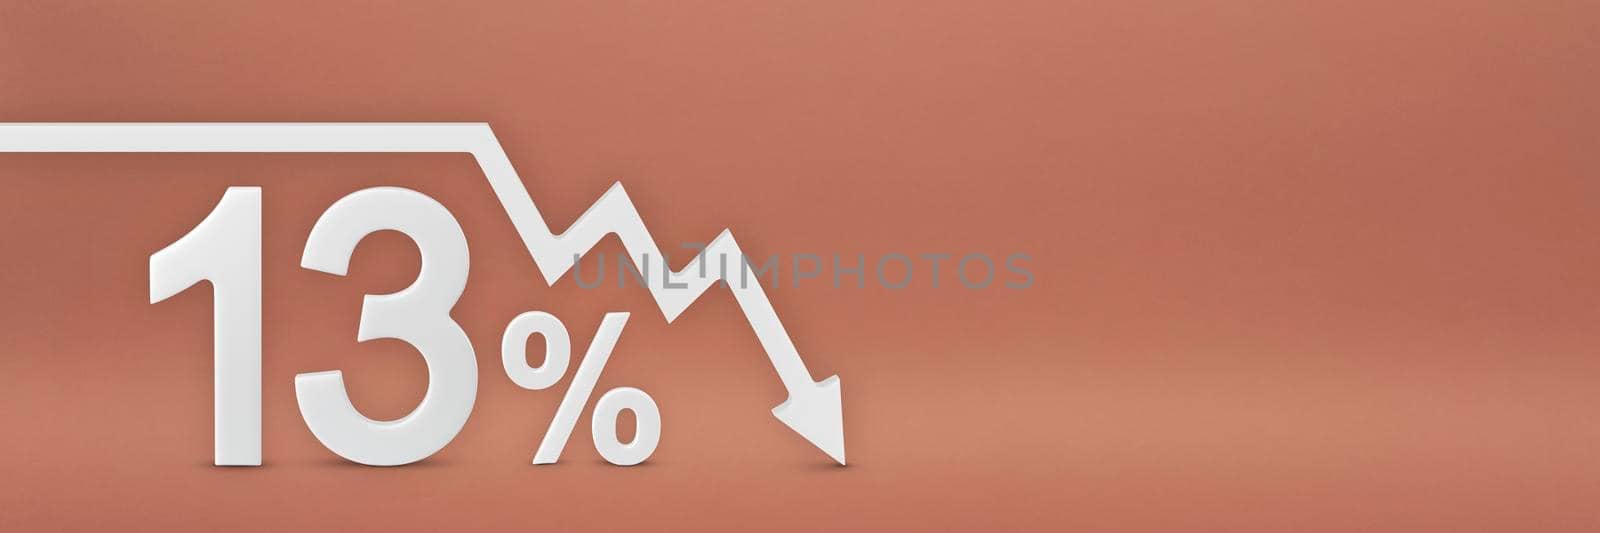 thirteen percent, the arrow on the graph is pointing down. Stock market crash, bear market, inflation. Economic collapse, collapse of stocks. 3d banner, 13 percent discount sign on a red background